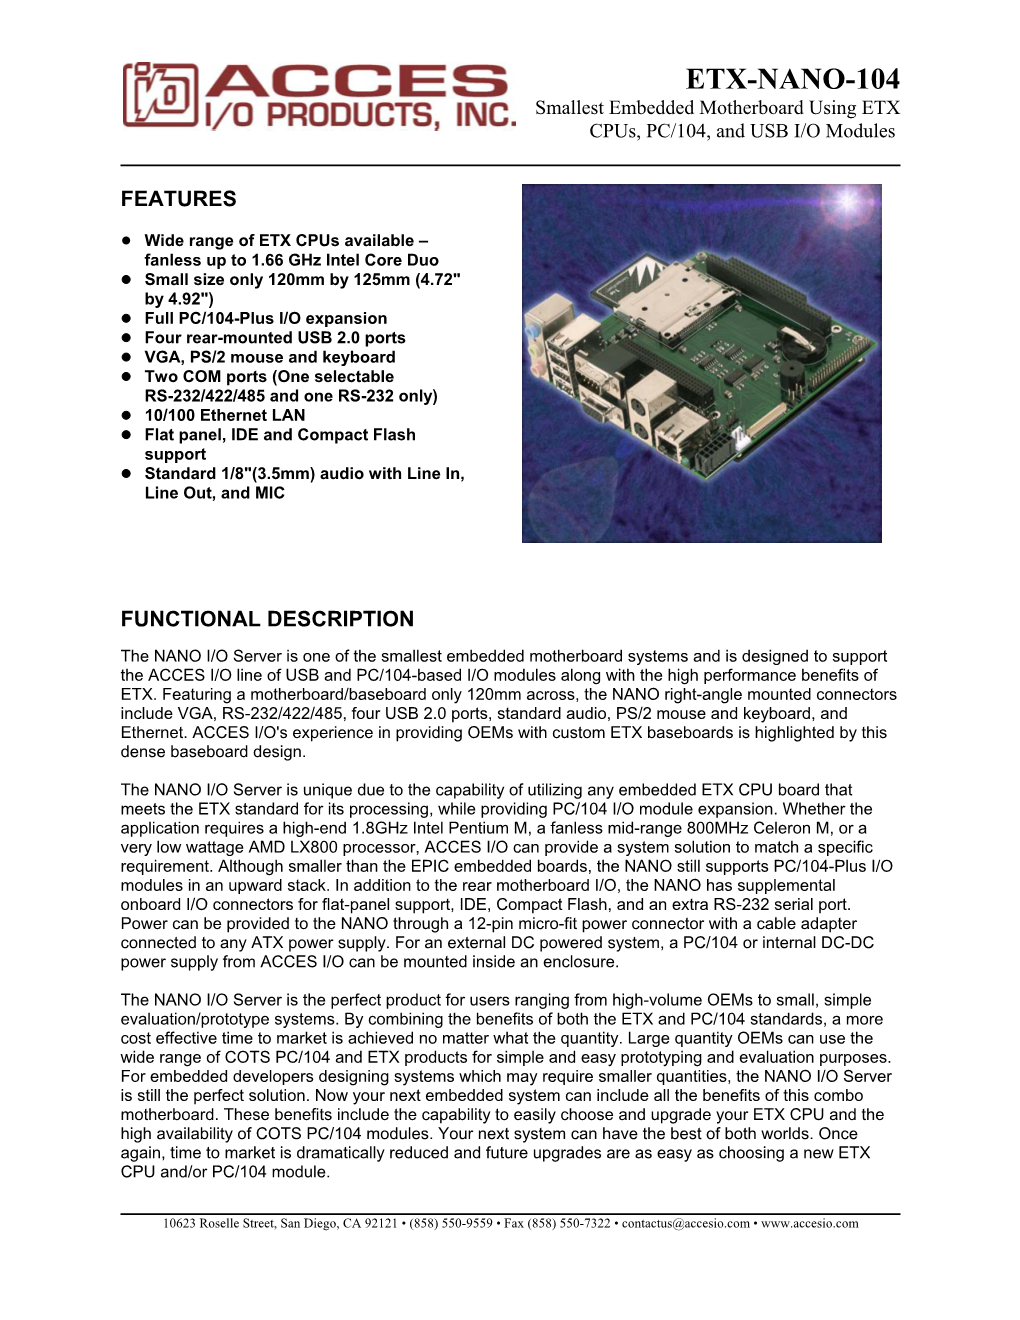 ETX-NANO-104 Smallest Embedded Motherboard Using ETX Cpus, PC/104, and USB I/O Modules